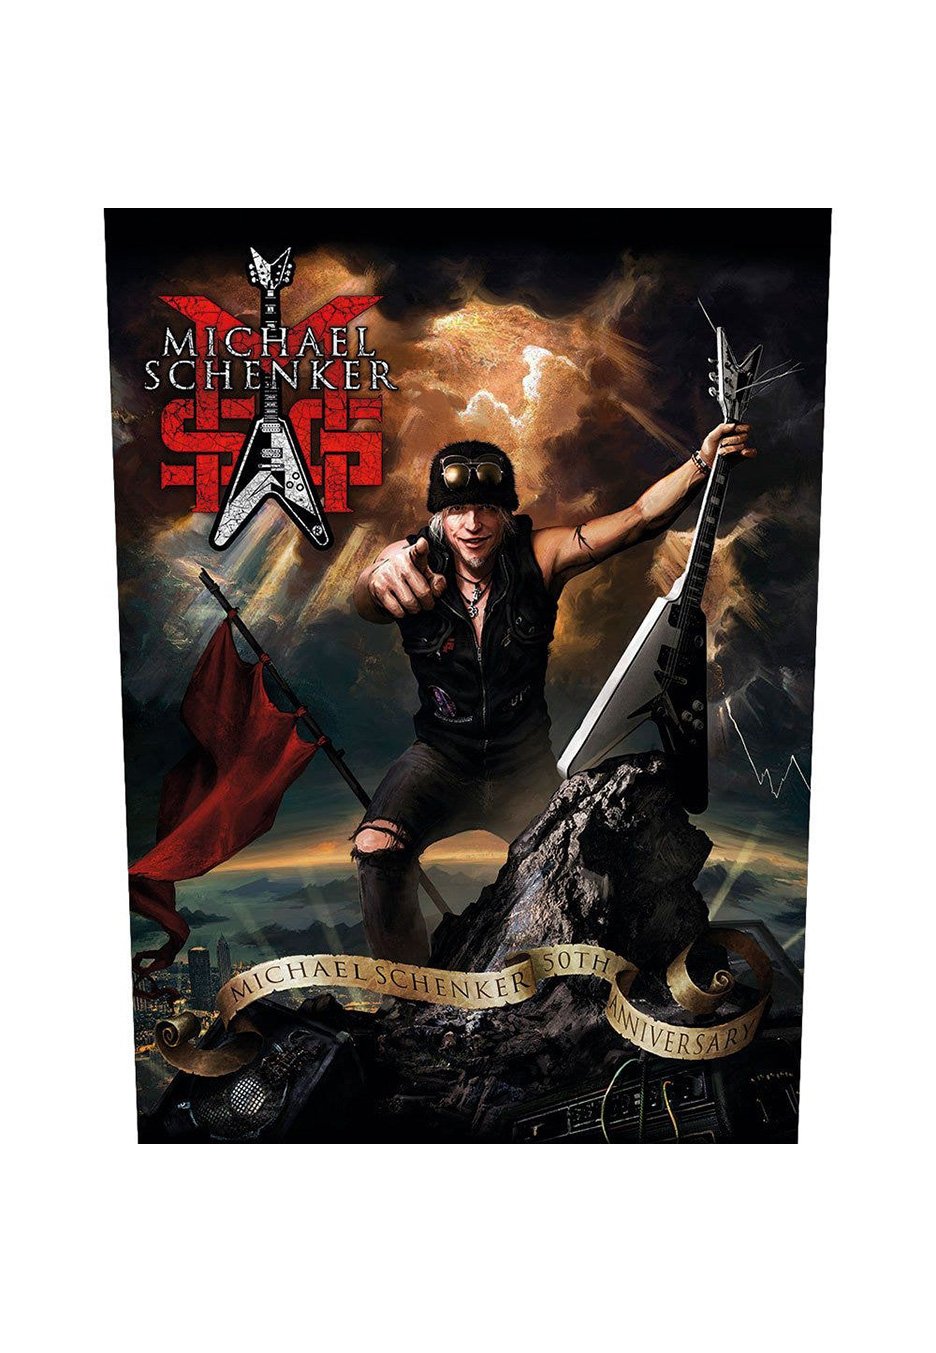 Msg (Michael Schenker Group) - Immortal Cover - Backpatch